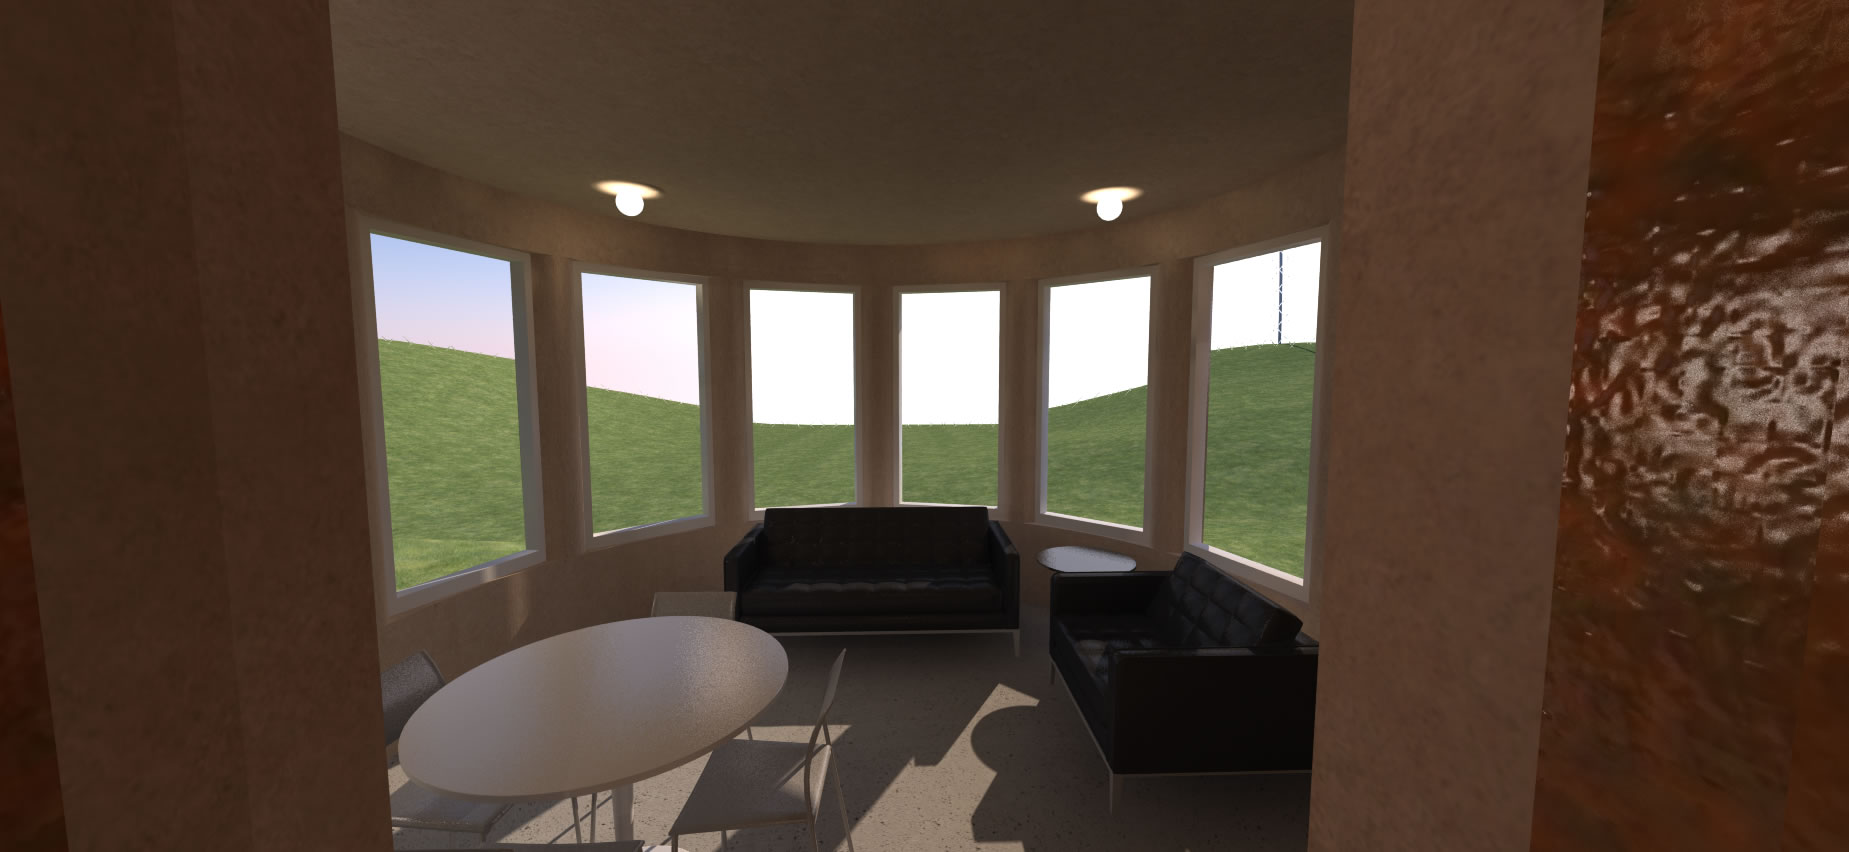 Tiny Fallout Shelter House - Living Room View